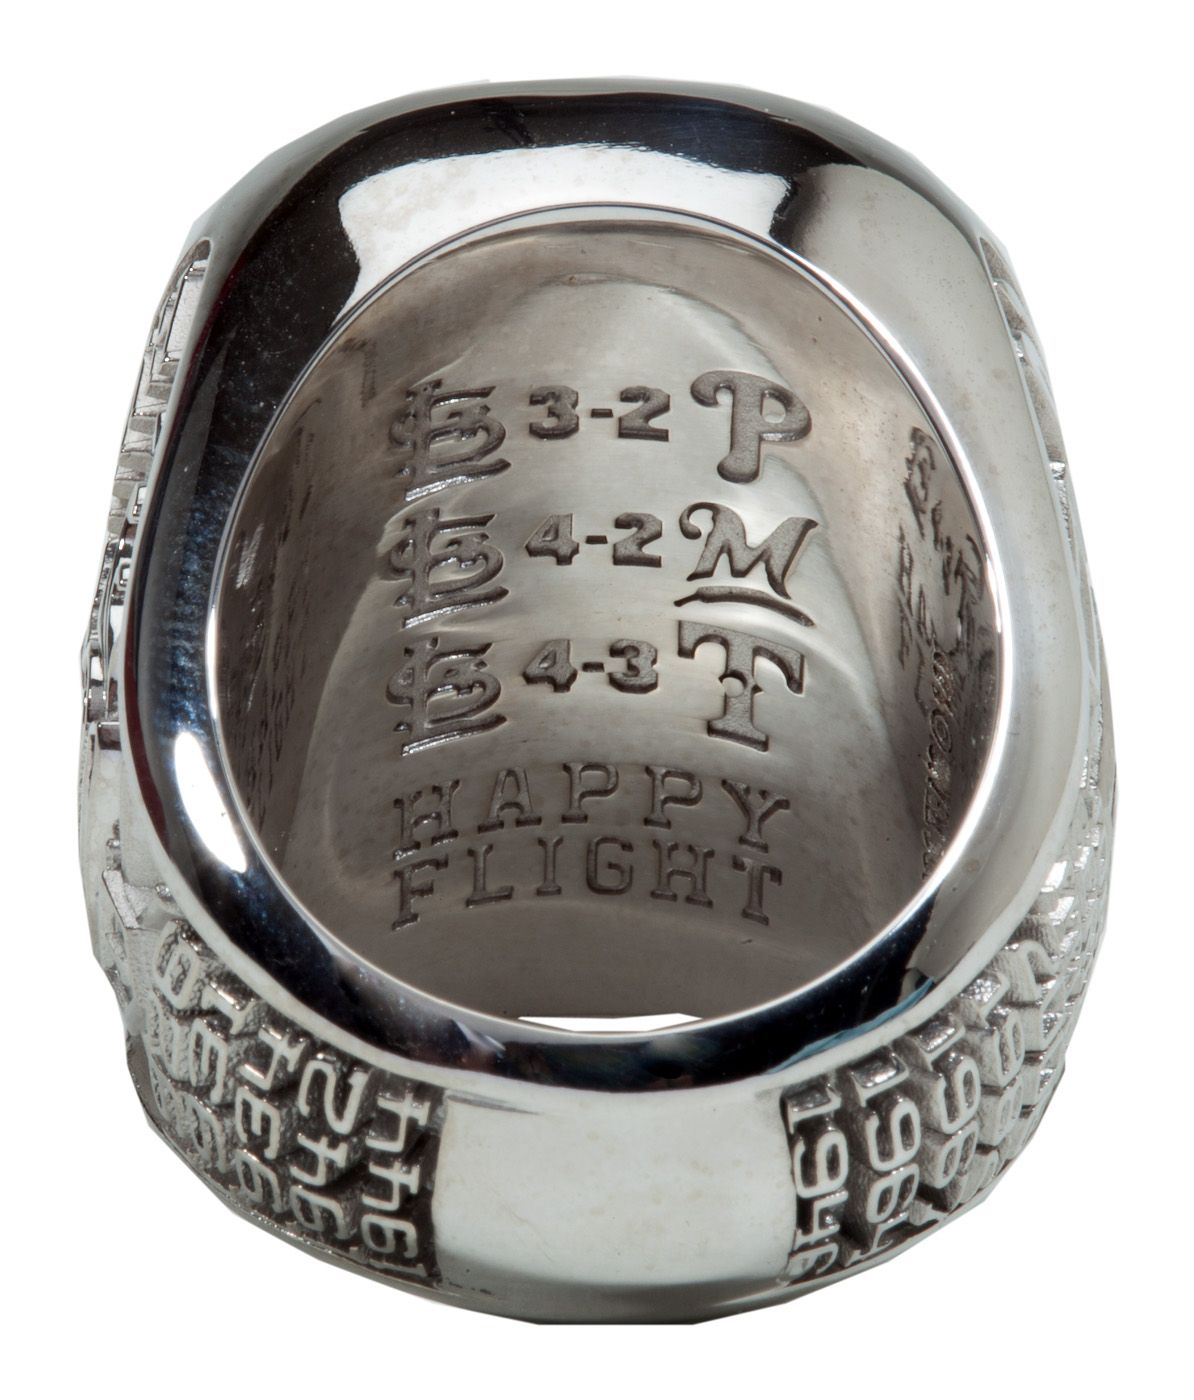 Sold at Auction: 2011 ST. LOUIS CARDINALS - MLB CHAMPIONSHIP RING